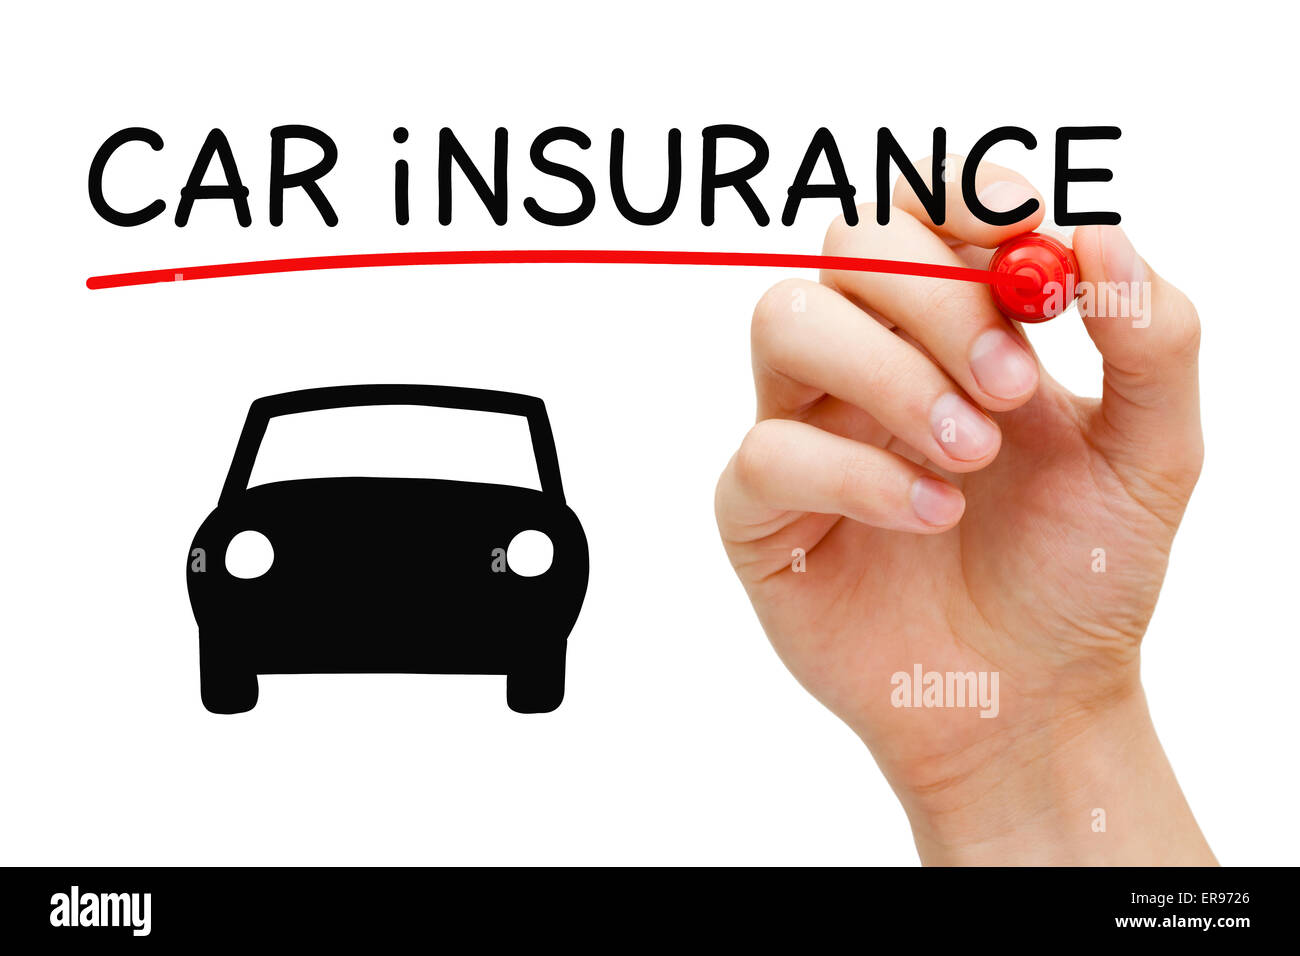 Hand Drawing Car Insurance Concept With Marker On Transparent Wipe Board Stock Photo Alamy